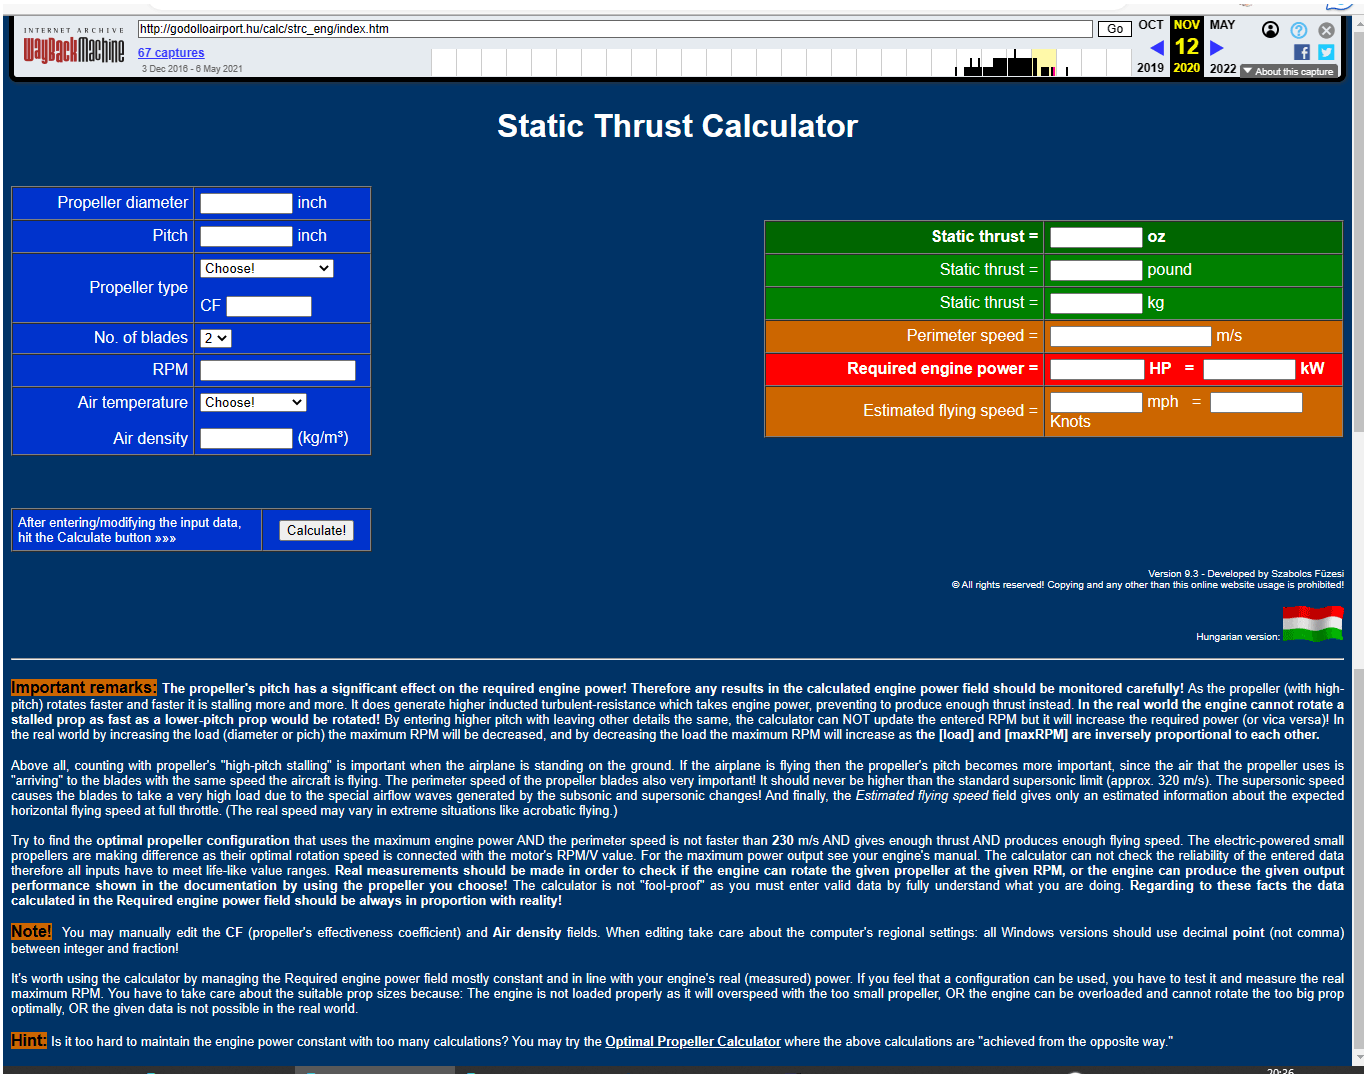 This file Static Thrust Calculator is COLLECTED BY the Internet Archive https://archive.org/